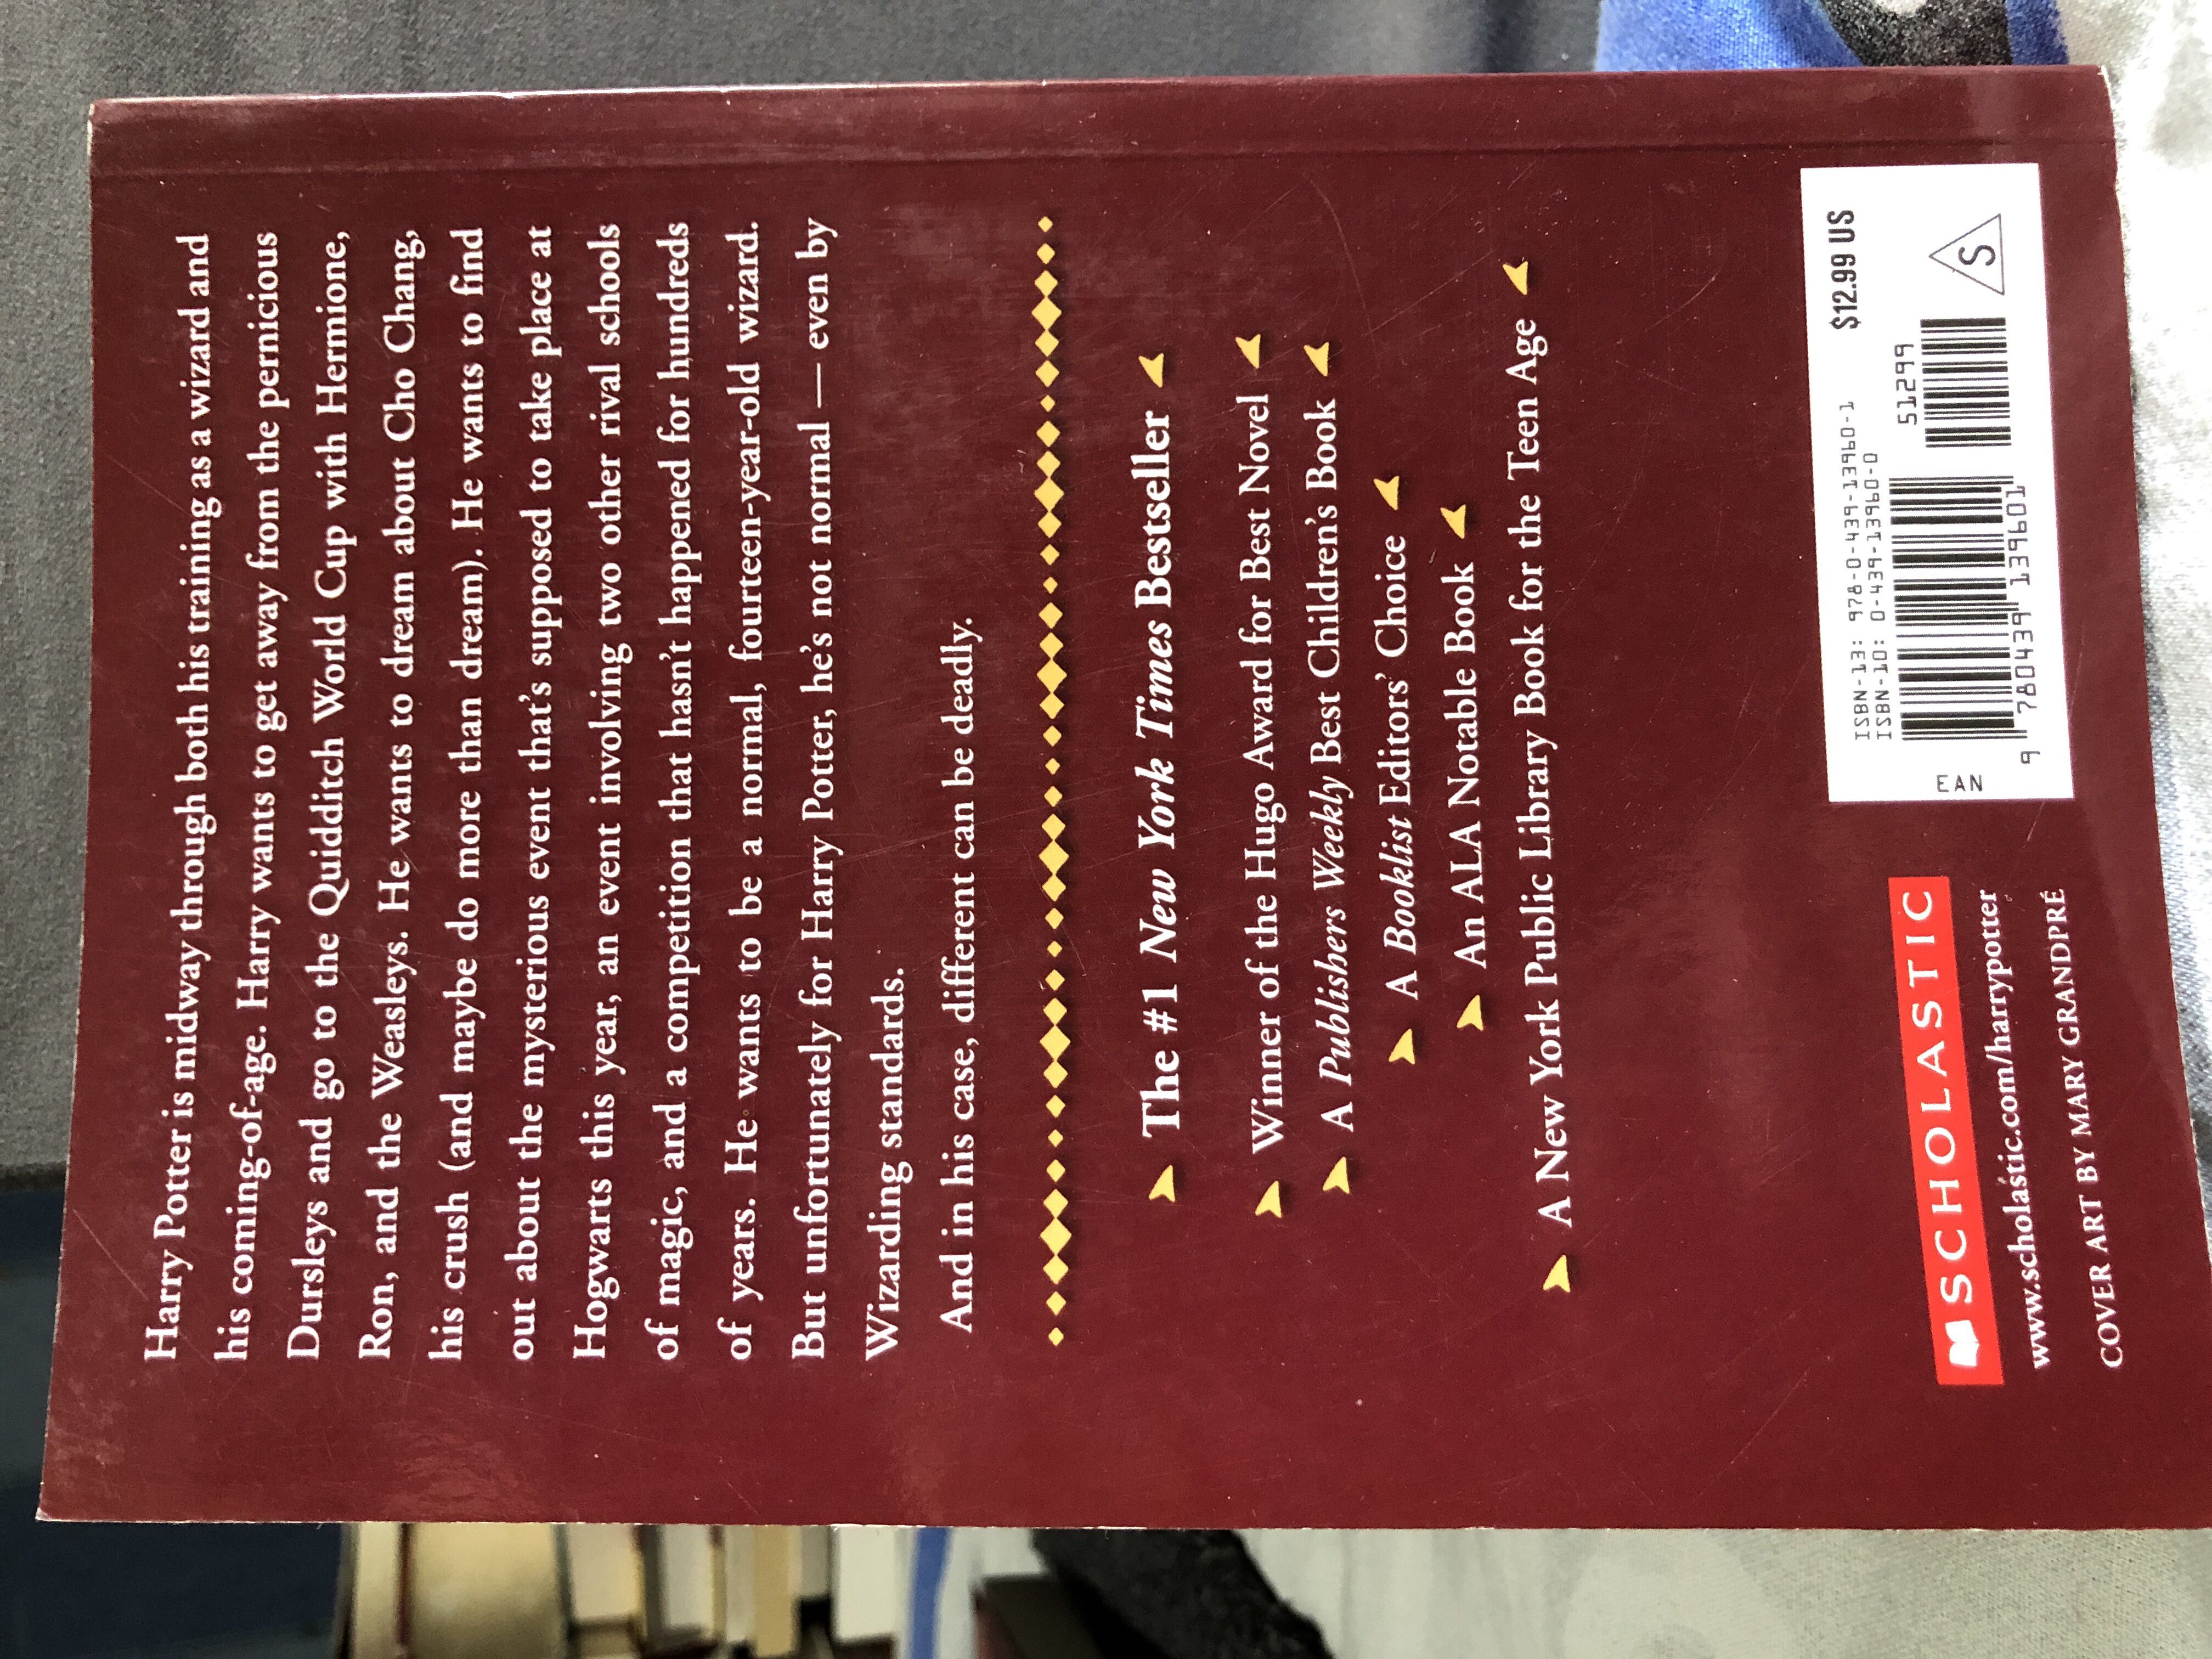 Goblet of Fire - J. K. Rowling (Scholastic Inc. - Paperback) book collectible [Barcode 9780439139601] - Main Image 3